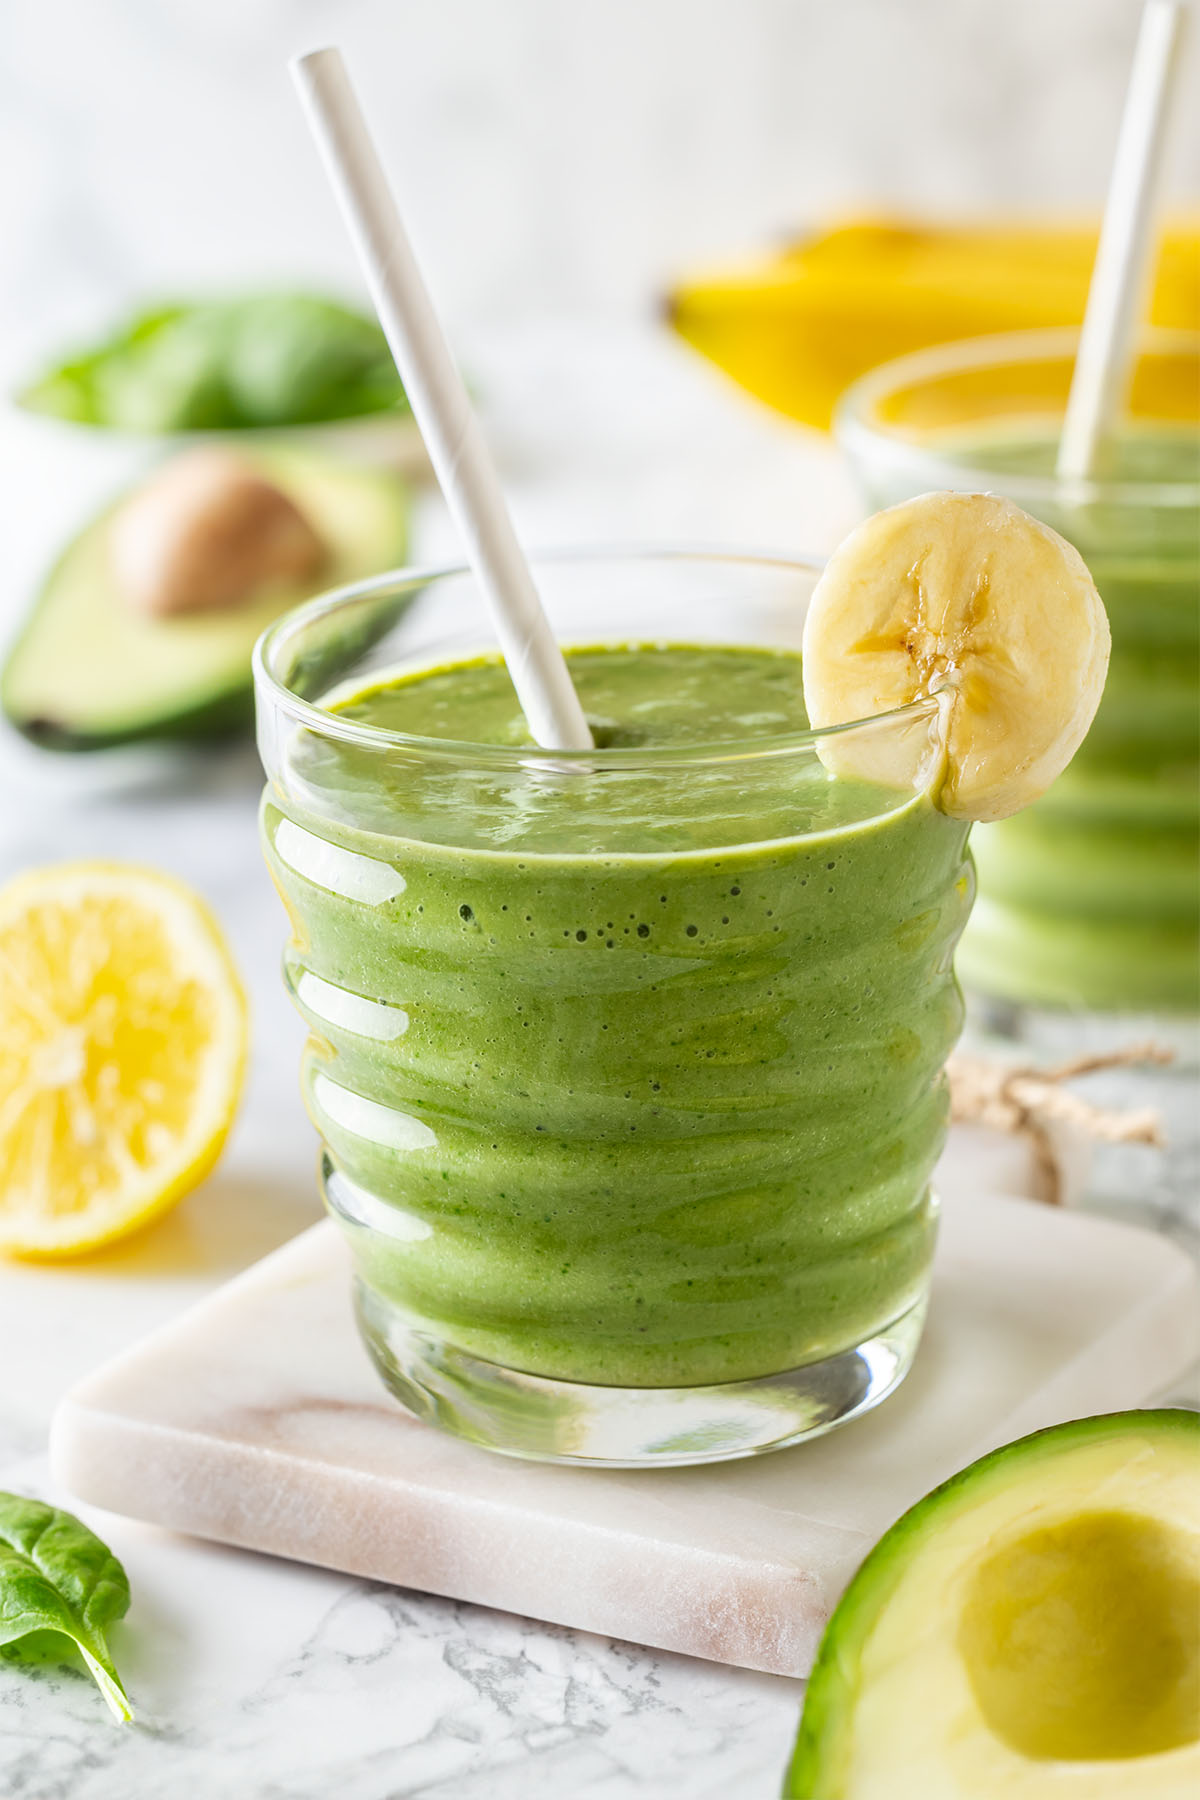 Green smoothie with banana and avocado with a straw